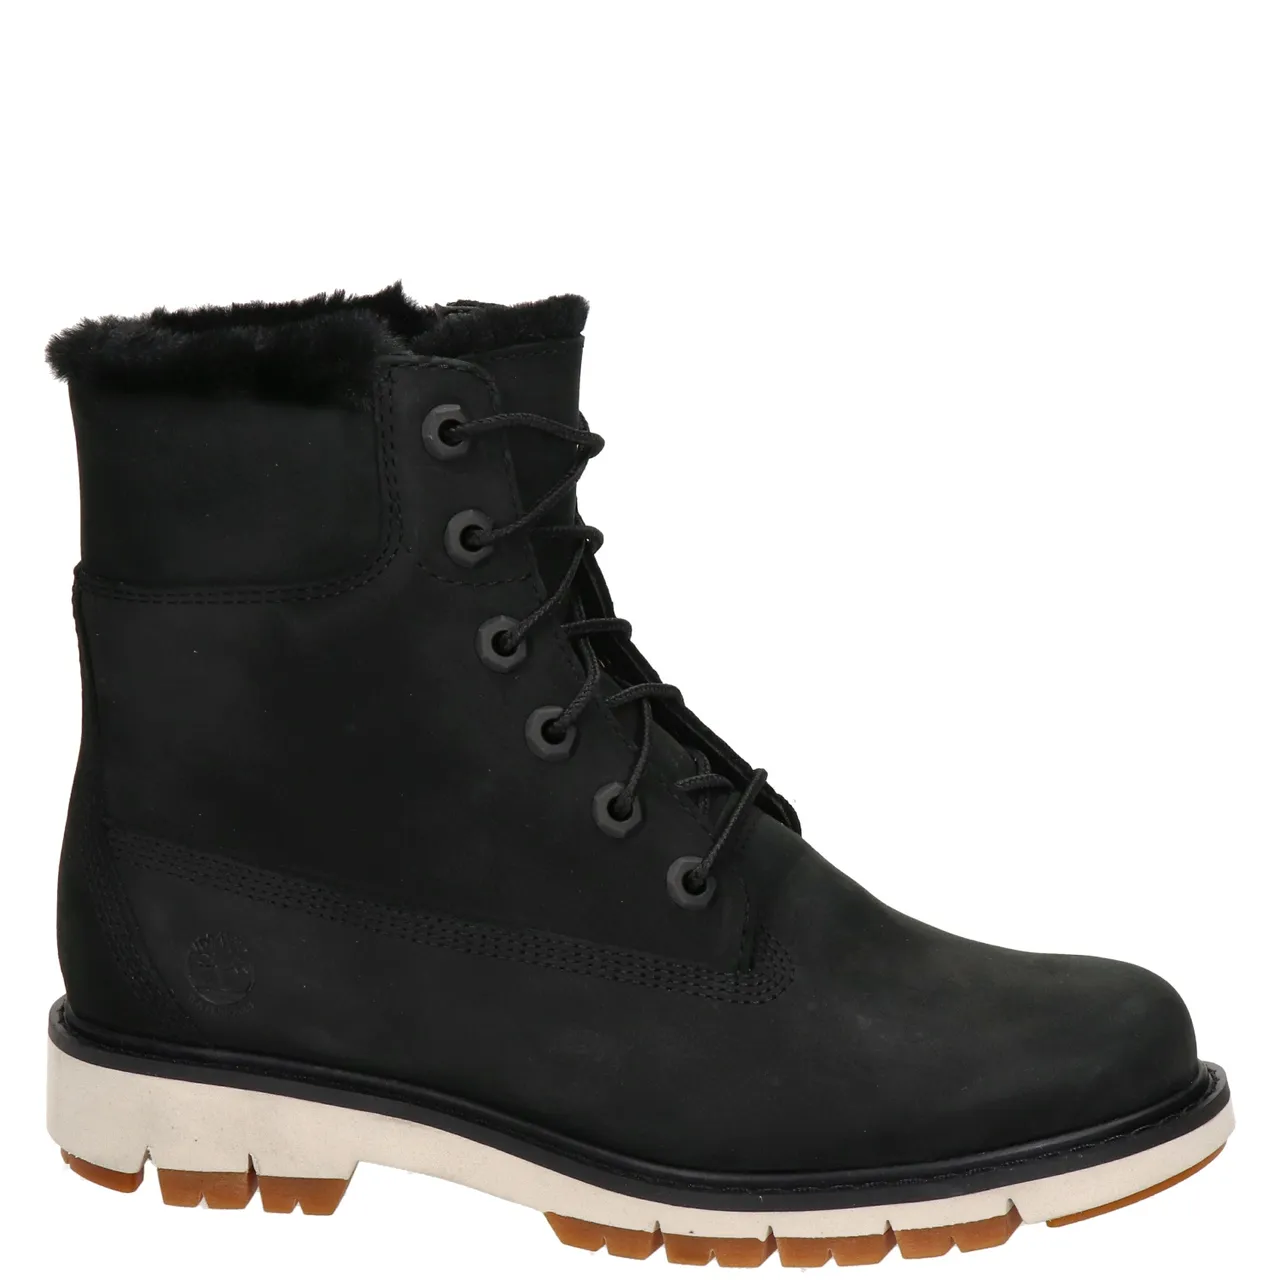 Timberland Lucia Way veterboots